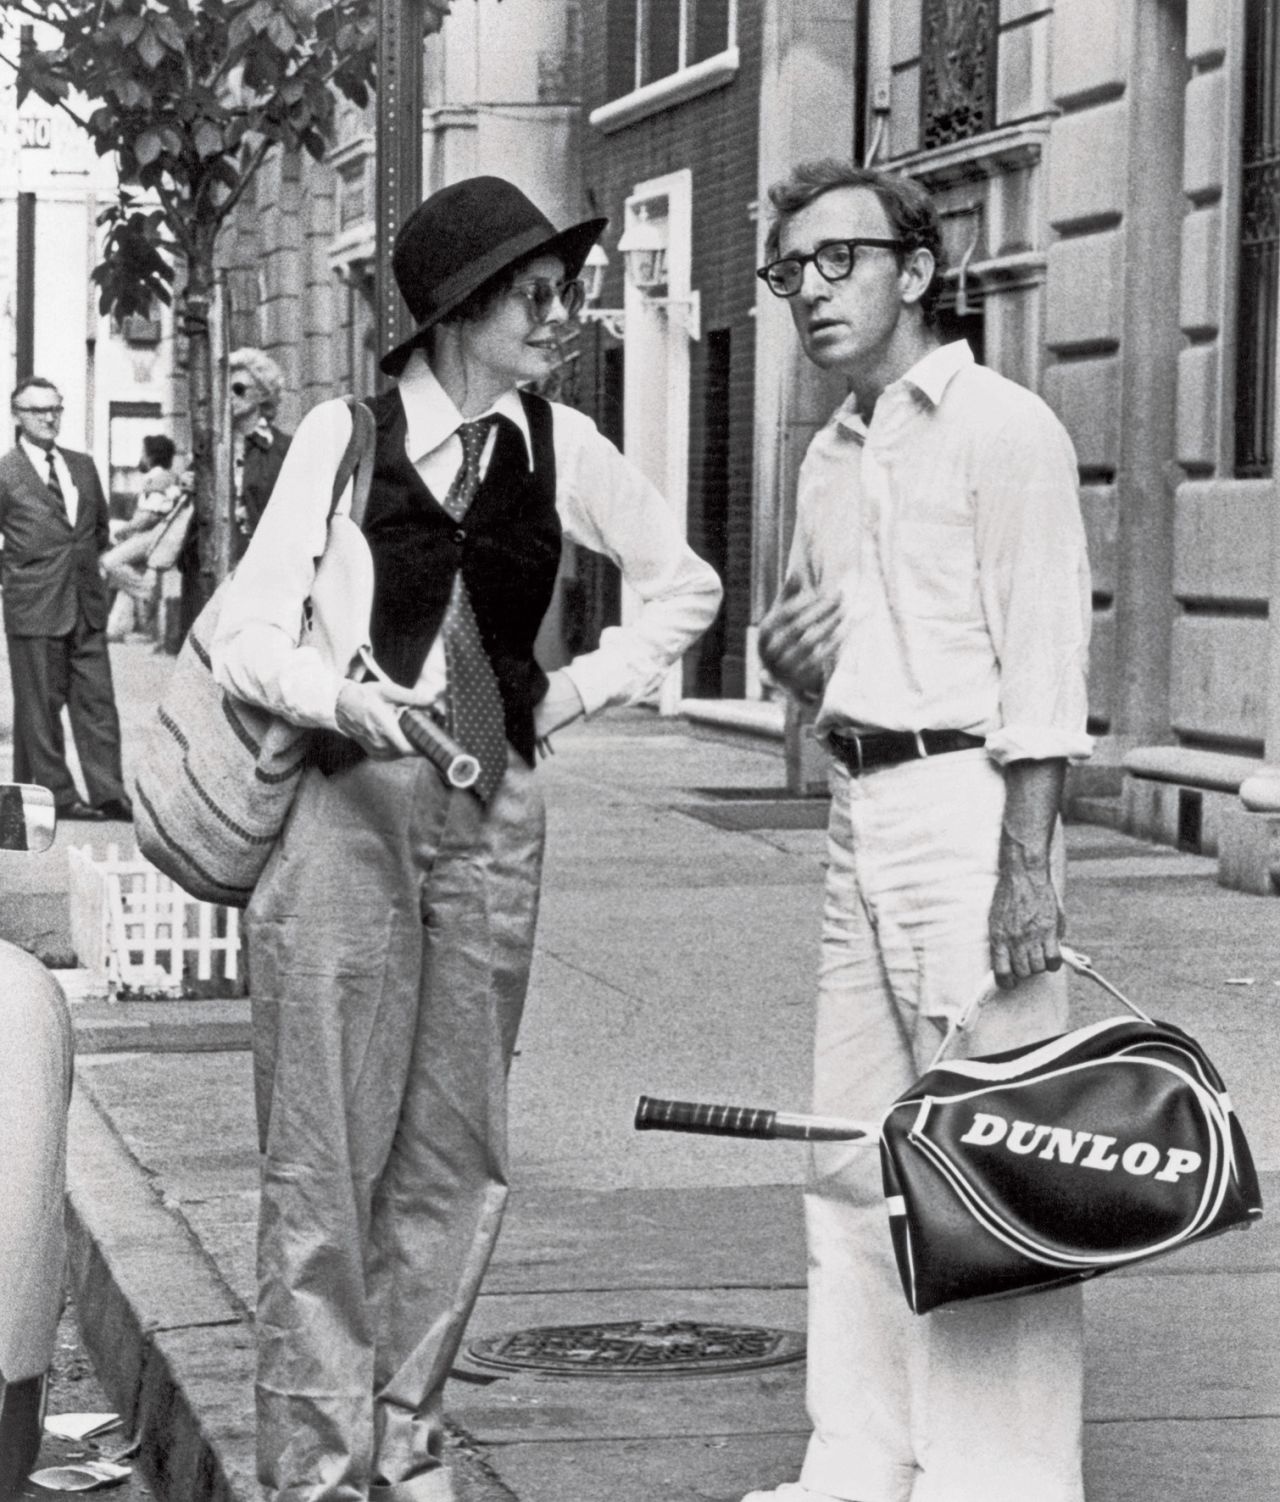 It might not be the most practical sports attire, but that didn't stop a generation swooning over Diane Keaton's cute-as-a-button waistcoat and tie ensemble in Woody Allen's 1977 film "Annie Hall." <br />The image features in the book,<a href="http://www.teneues.com/shop-int/the-stylish-life-tennis2.html" target="_blank" target="_blank"> "The Stylish Life: Tennis,"</a> published by teNeues, courtesy Hulton-Deutsch Collection/CORBIS.